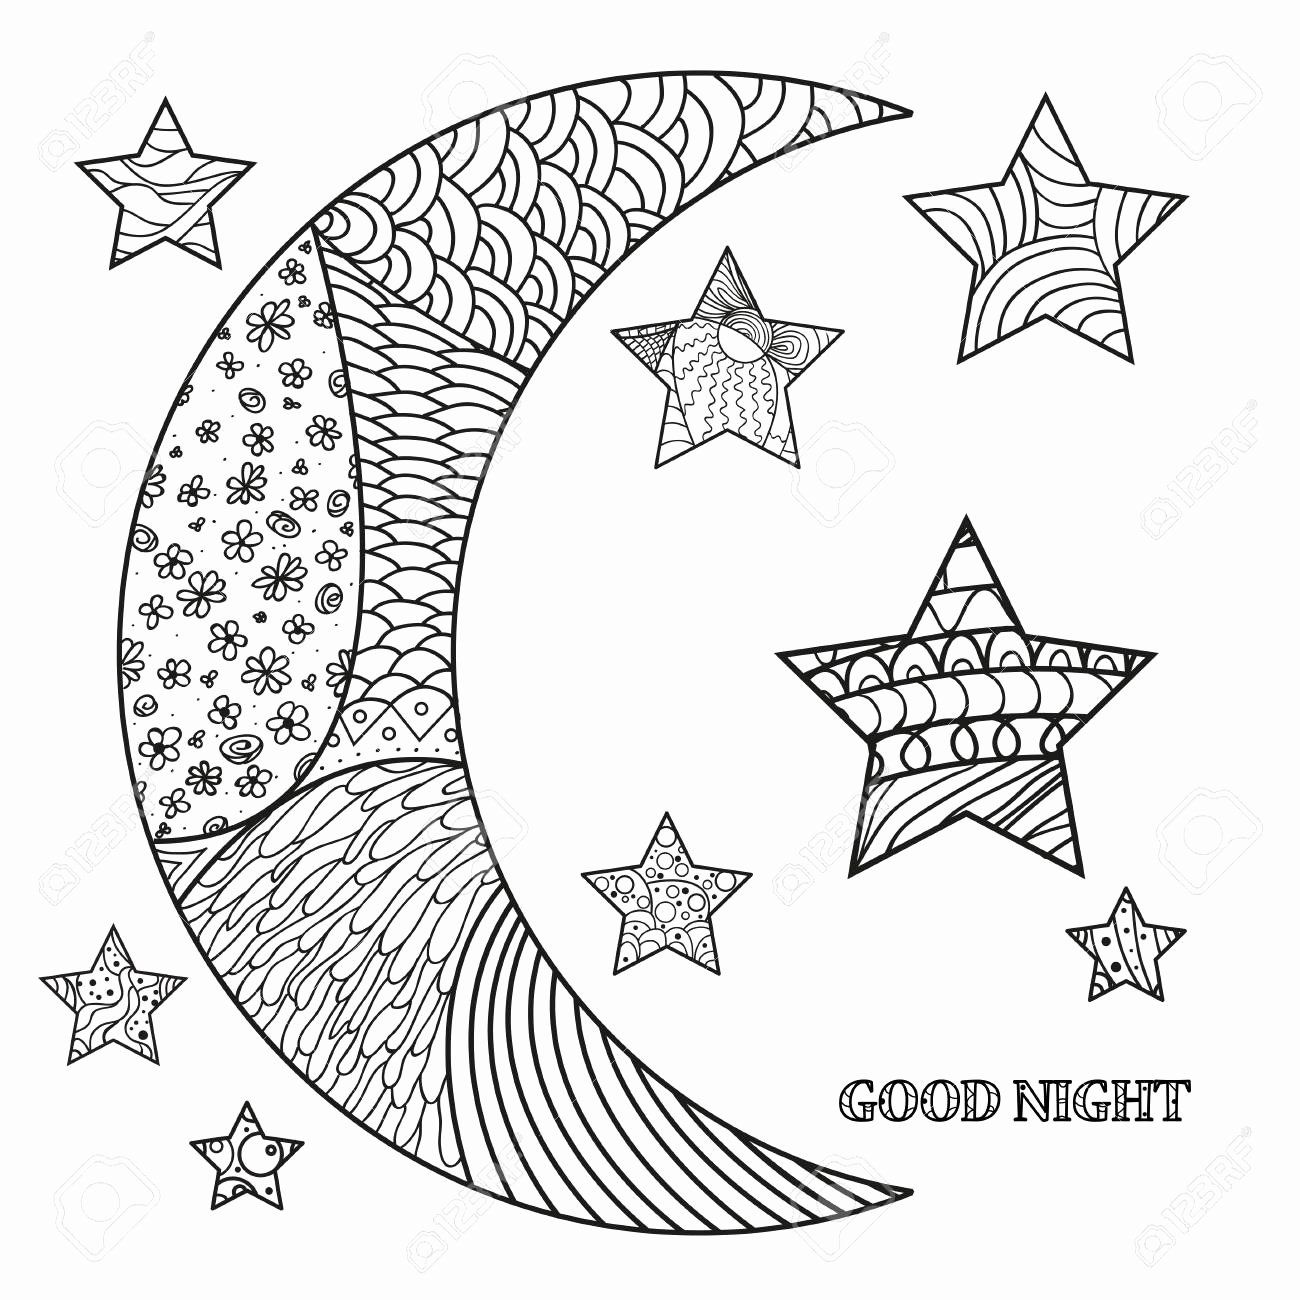 Sun Coloring Pages for Preschoolers New Coloring Pages 61 Moon and Stars Coloring  Page Image Ideas in 2020 | Coloring pages, Sun coloring pages, Star coloring  pages